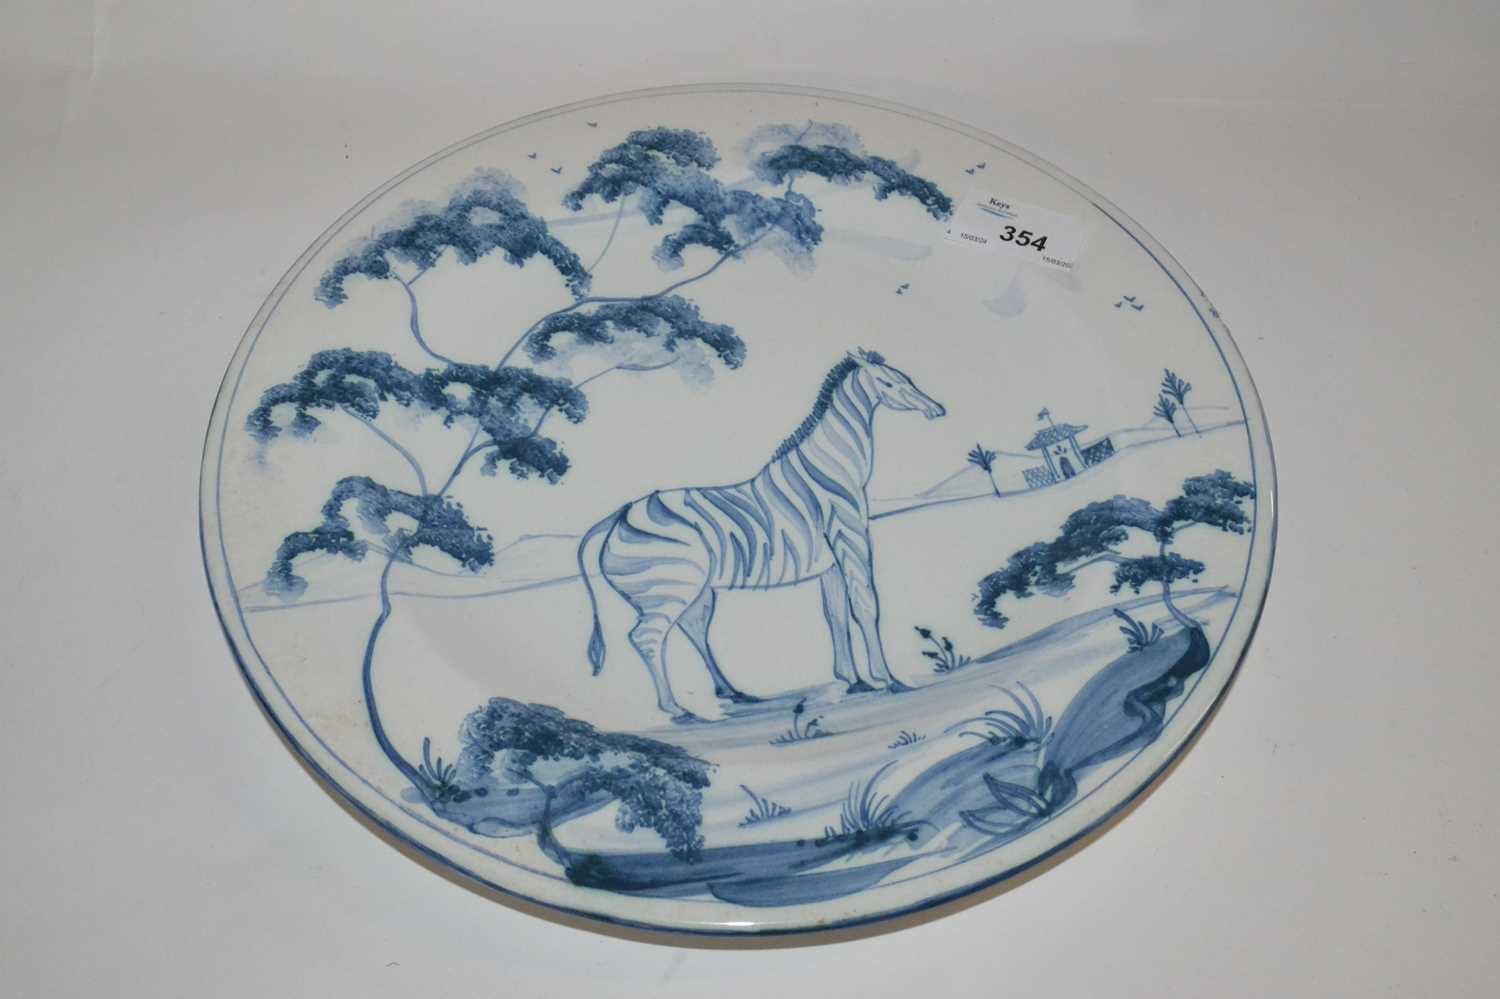 A Isis Ceramics dish made for Colefax & Fowler decorated in Delft style with a giraffe in a